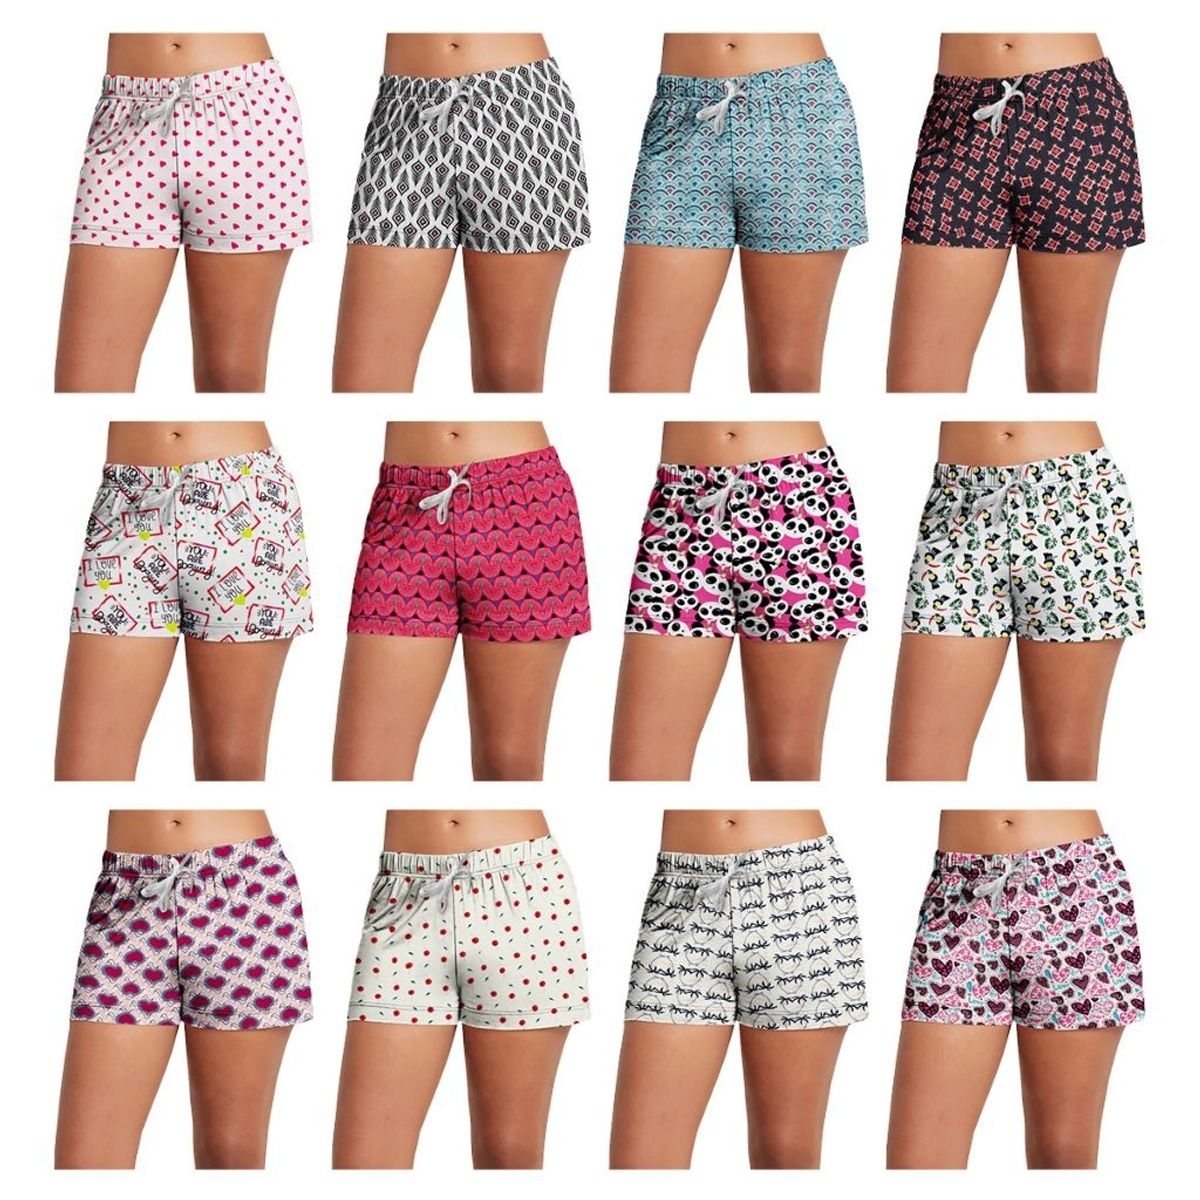 2-Pack: Women's Super-Soft Lightweight Fun Printed Comfy Lounge Bottom Pajama Shorts W/ Drawstring - Small, Shapes